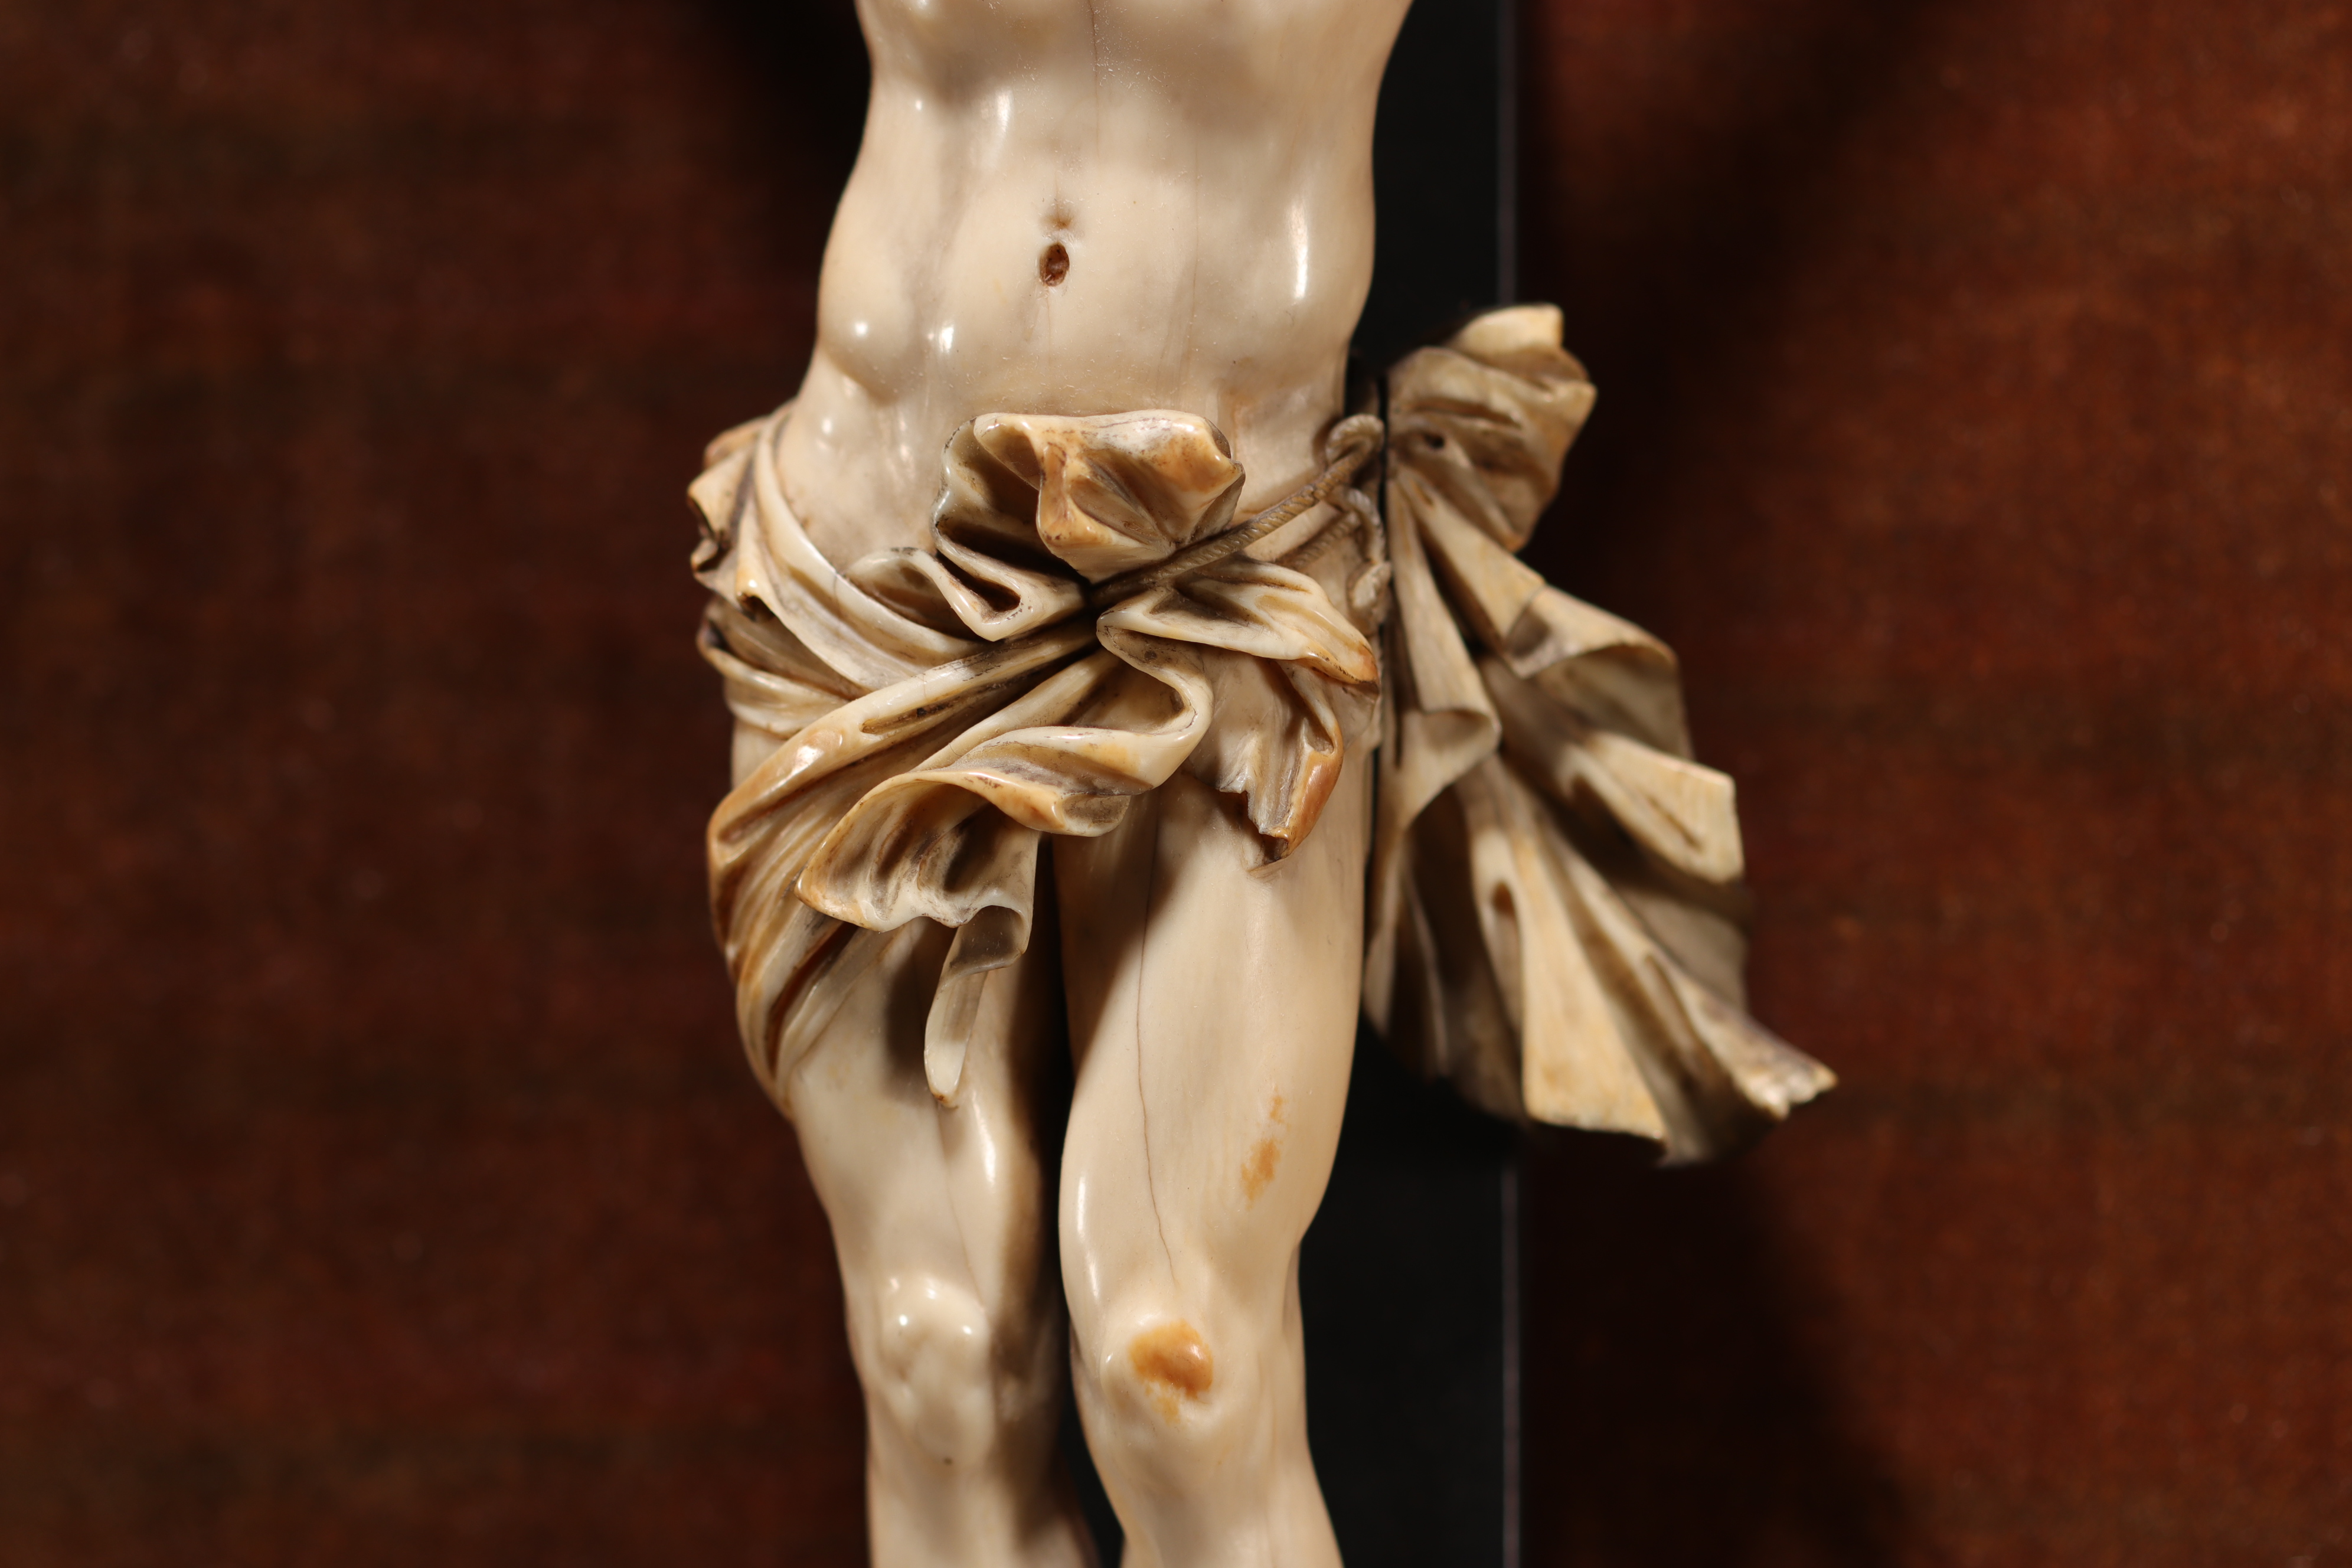 Christ in ivory from the 18th century - Image 5 of 6